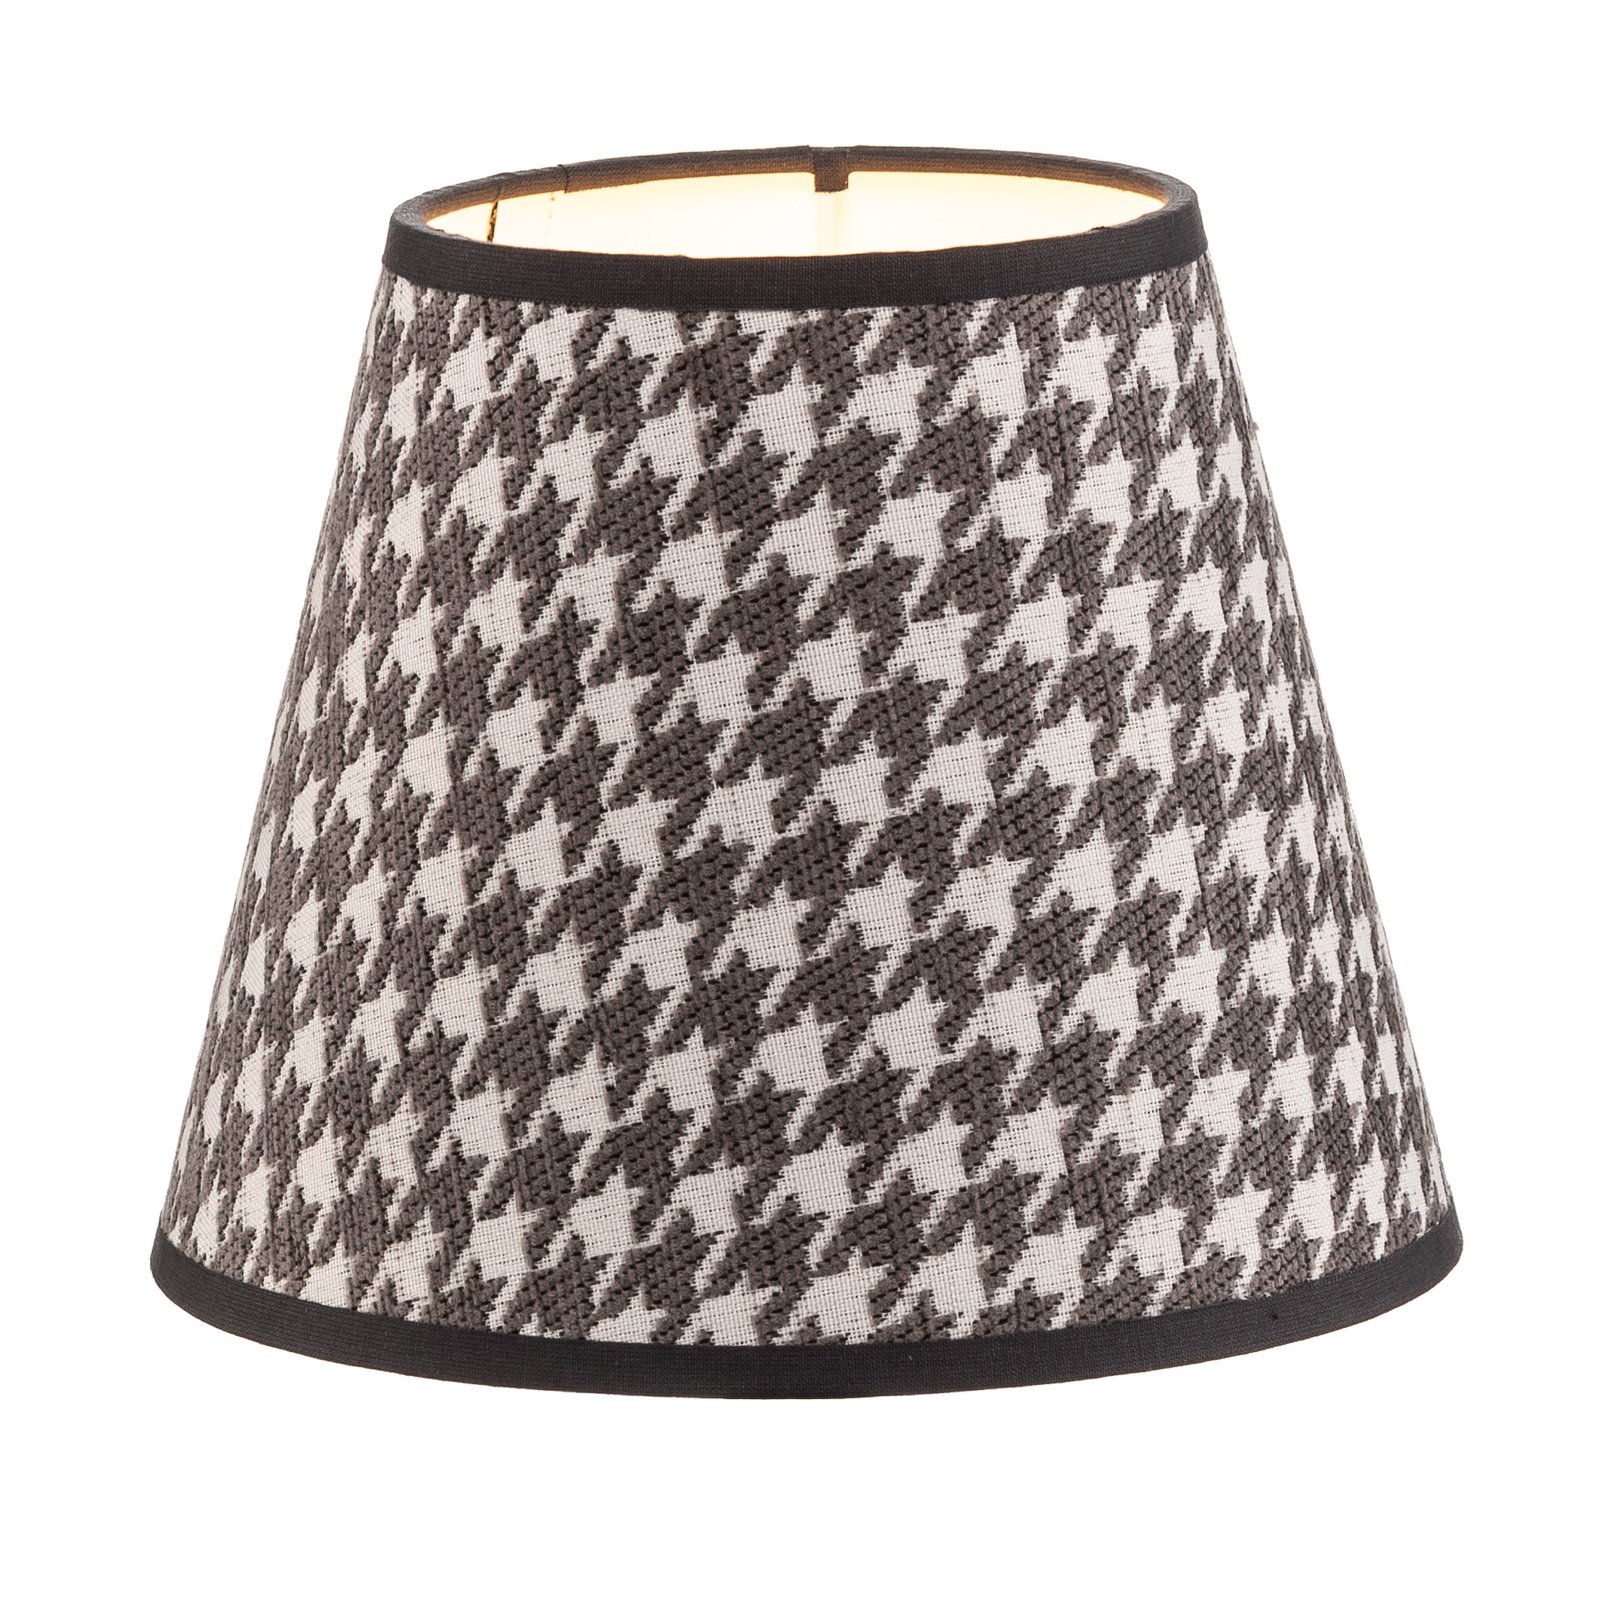 Sofia lampshade 15.5 cm, houndstooth pattern grey